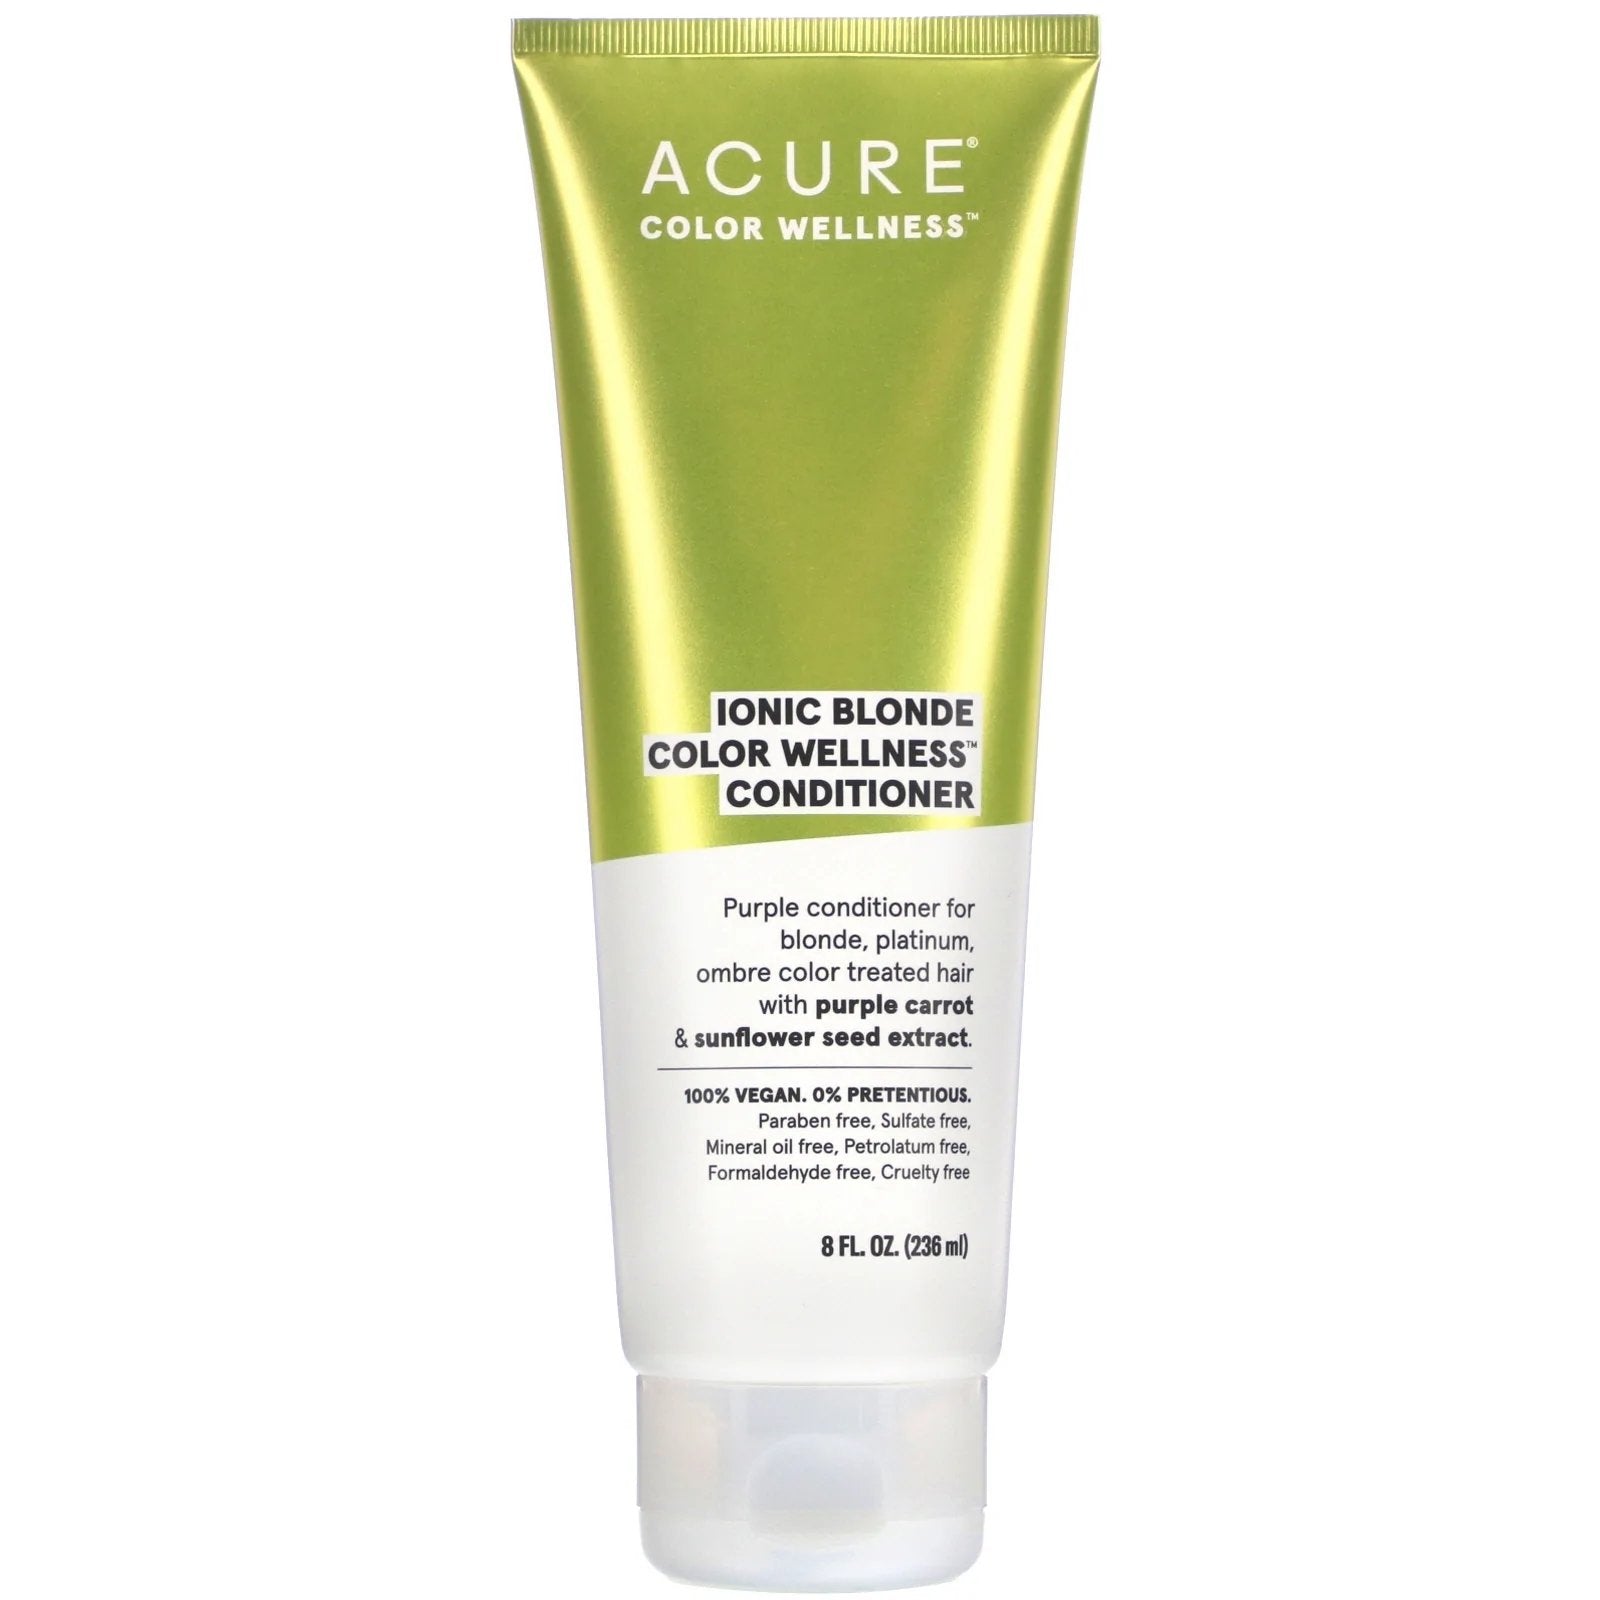 Iconic Blond Colour Wellness Conditioner by Acure